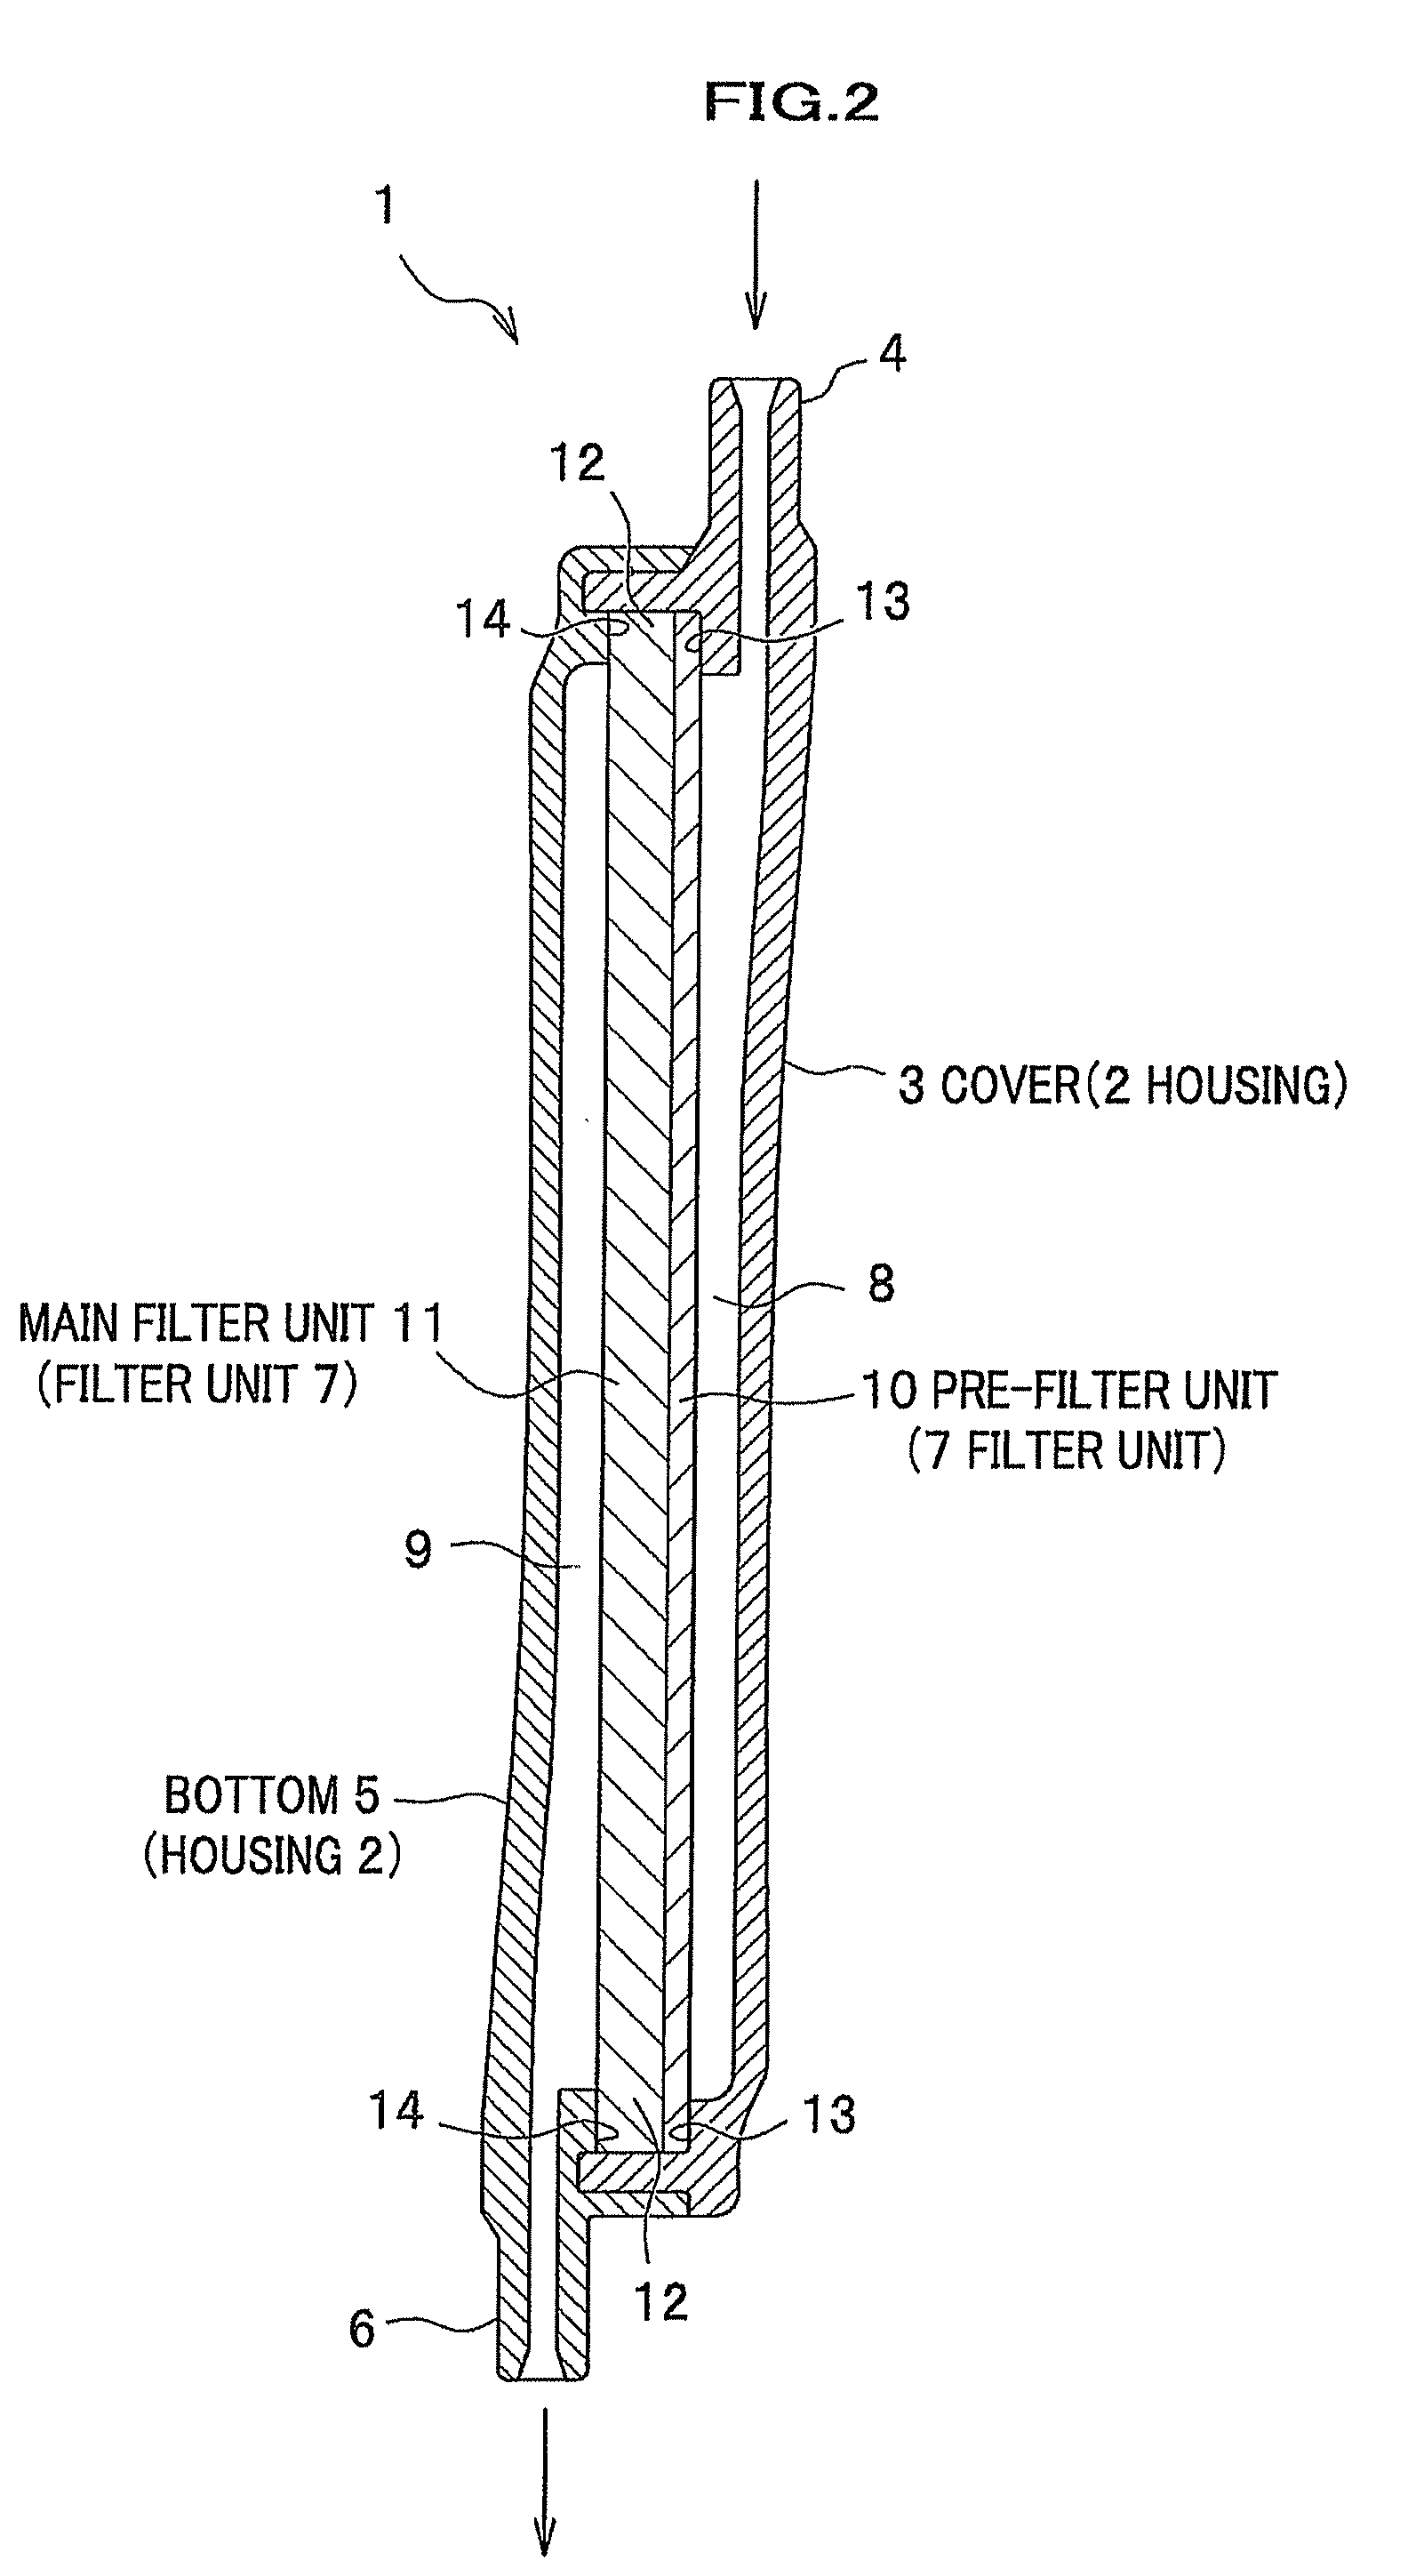 Blood treatment filter and blood treatment circuit